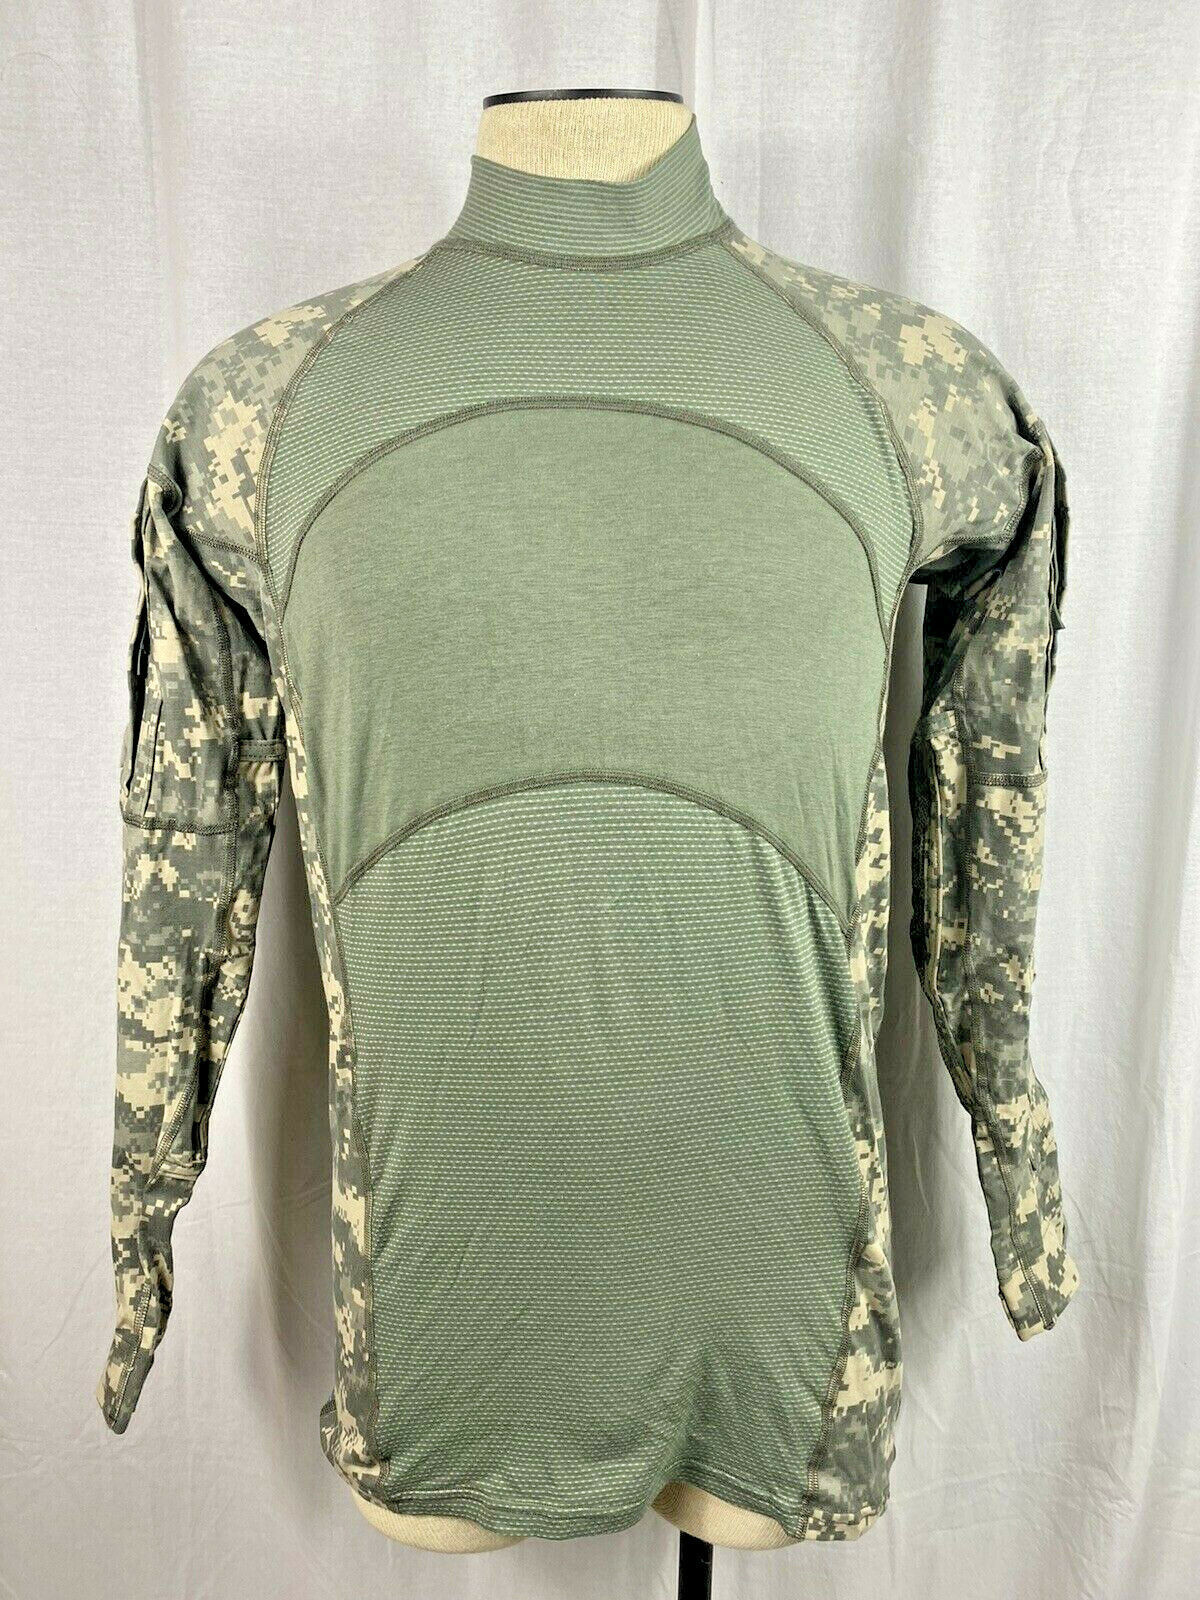 Primary image for Army Combat Shirt, ACU, Medium, 8415-01-548-7206, NEW / NWOT